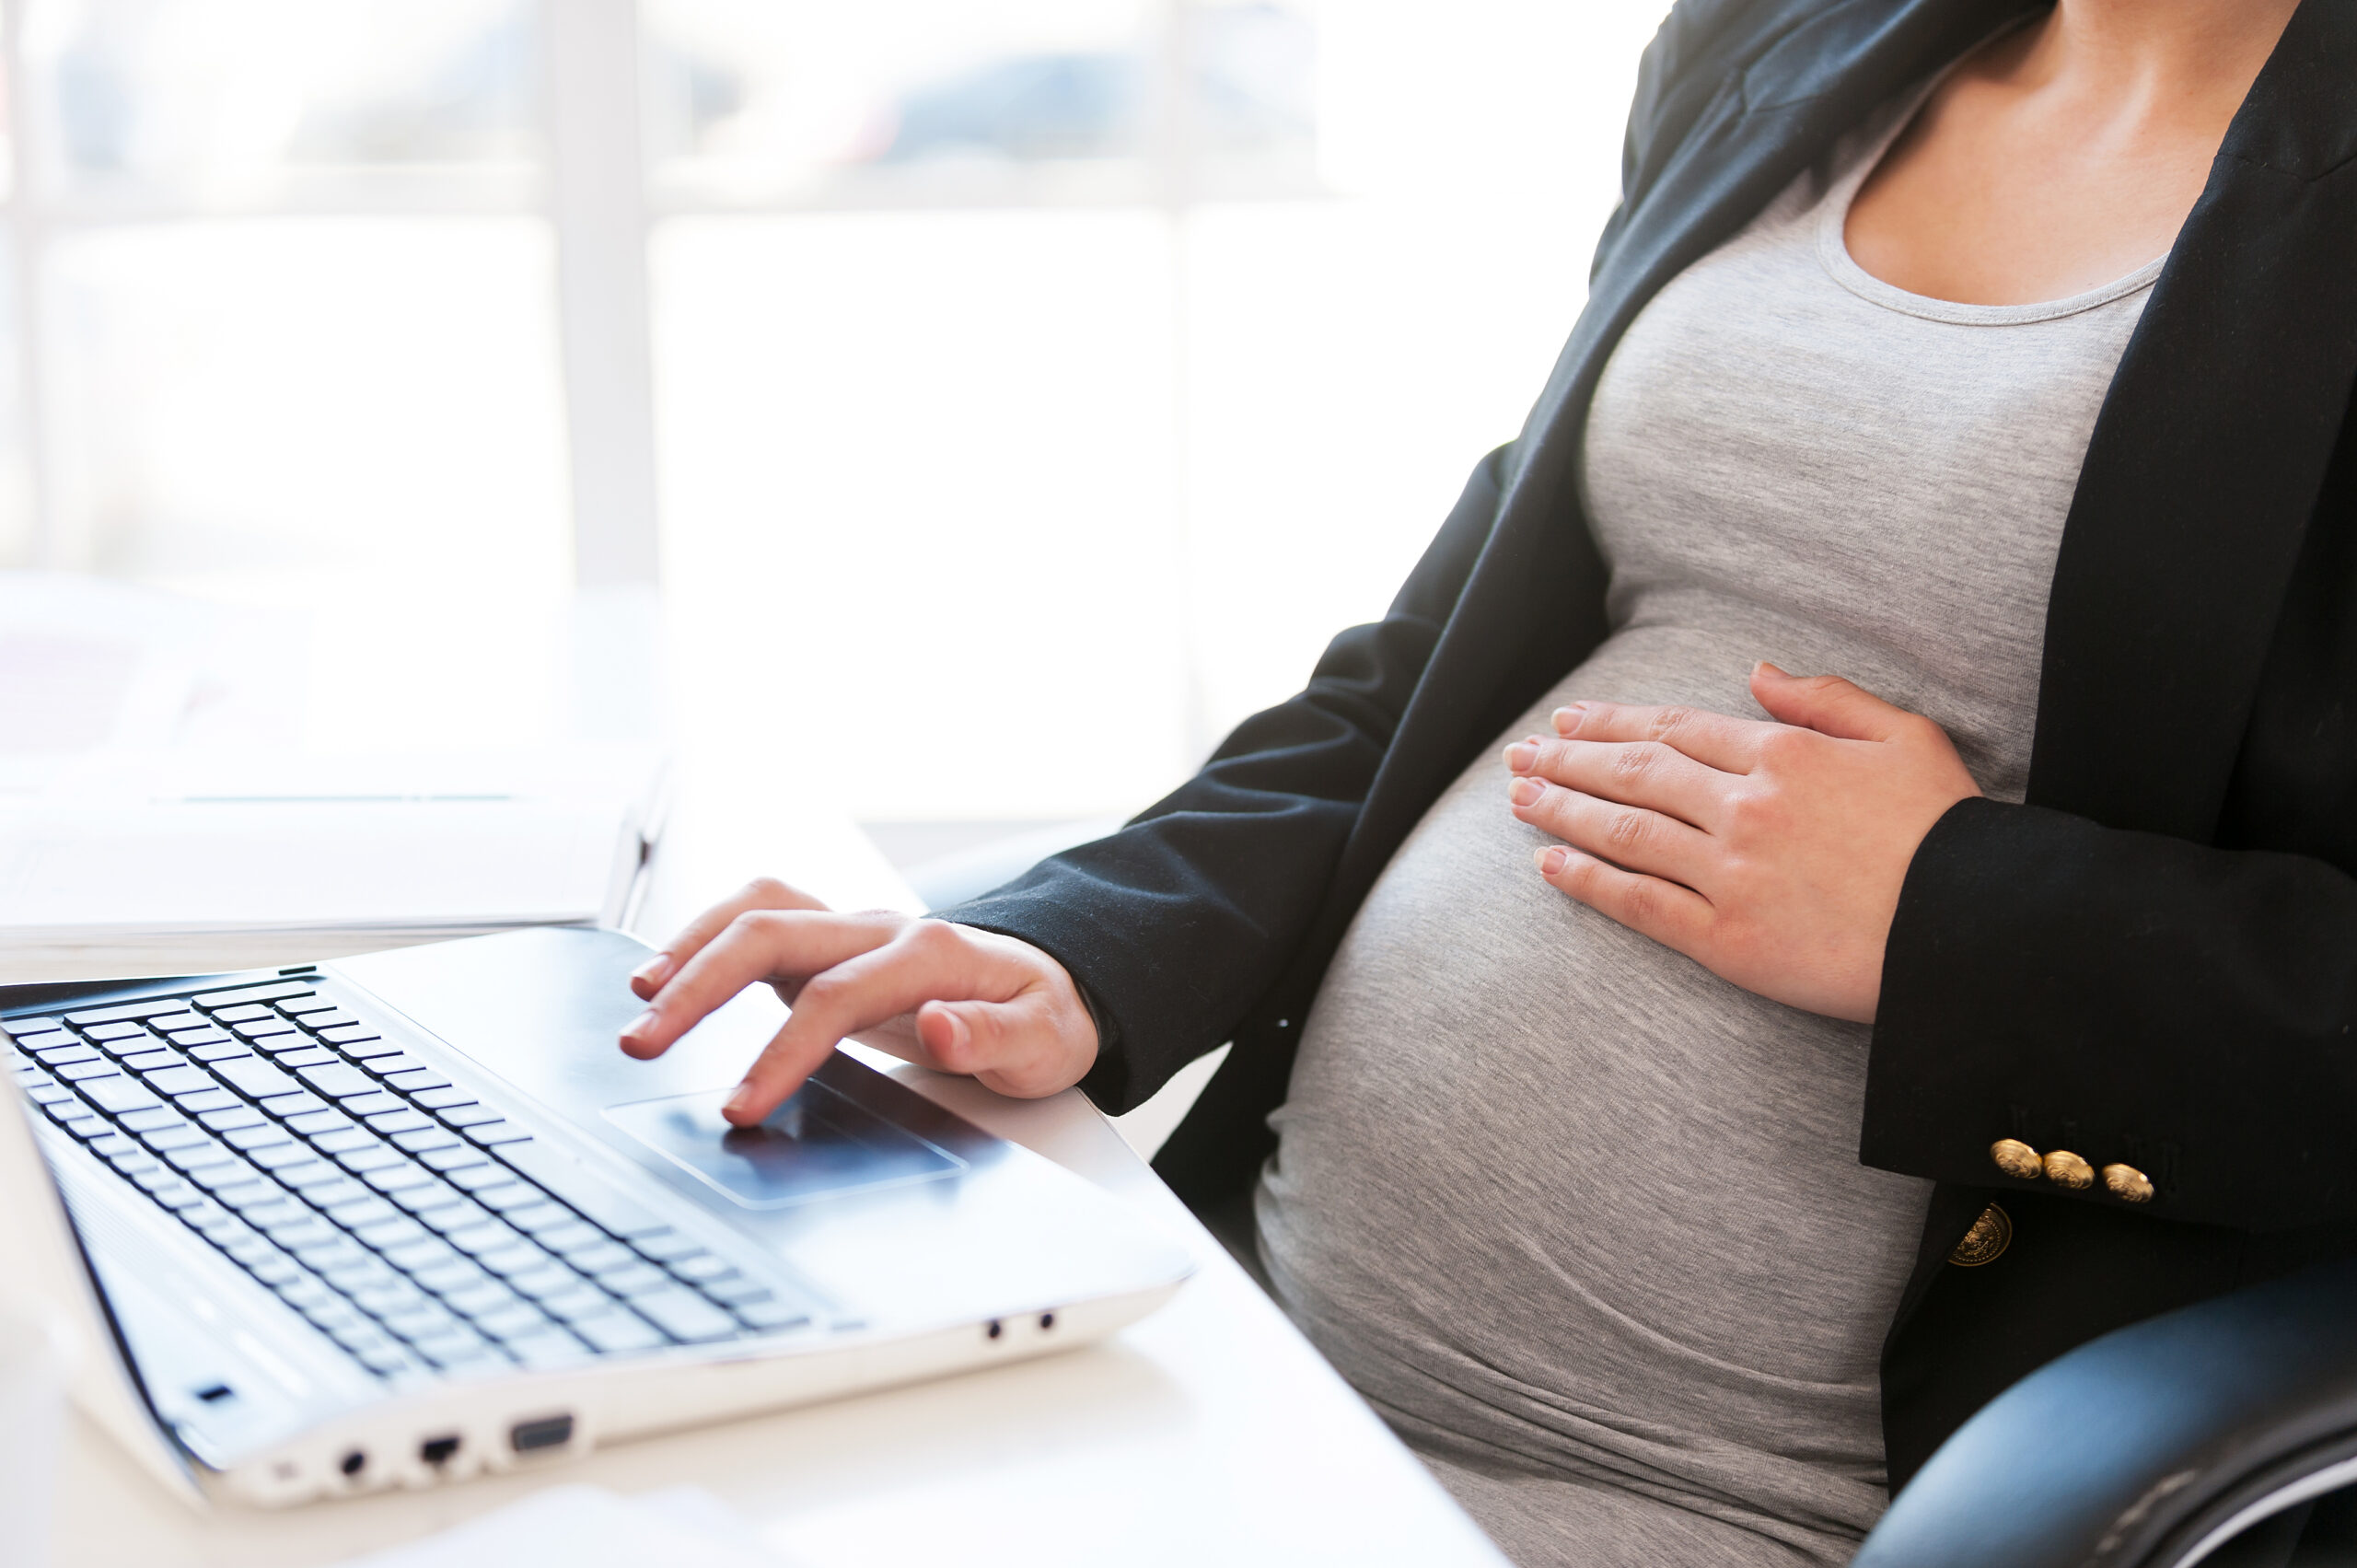 EEOC Releases Draft Regulations for the Pregnant Workers Fairness Act